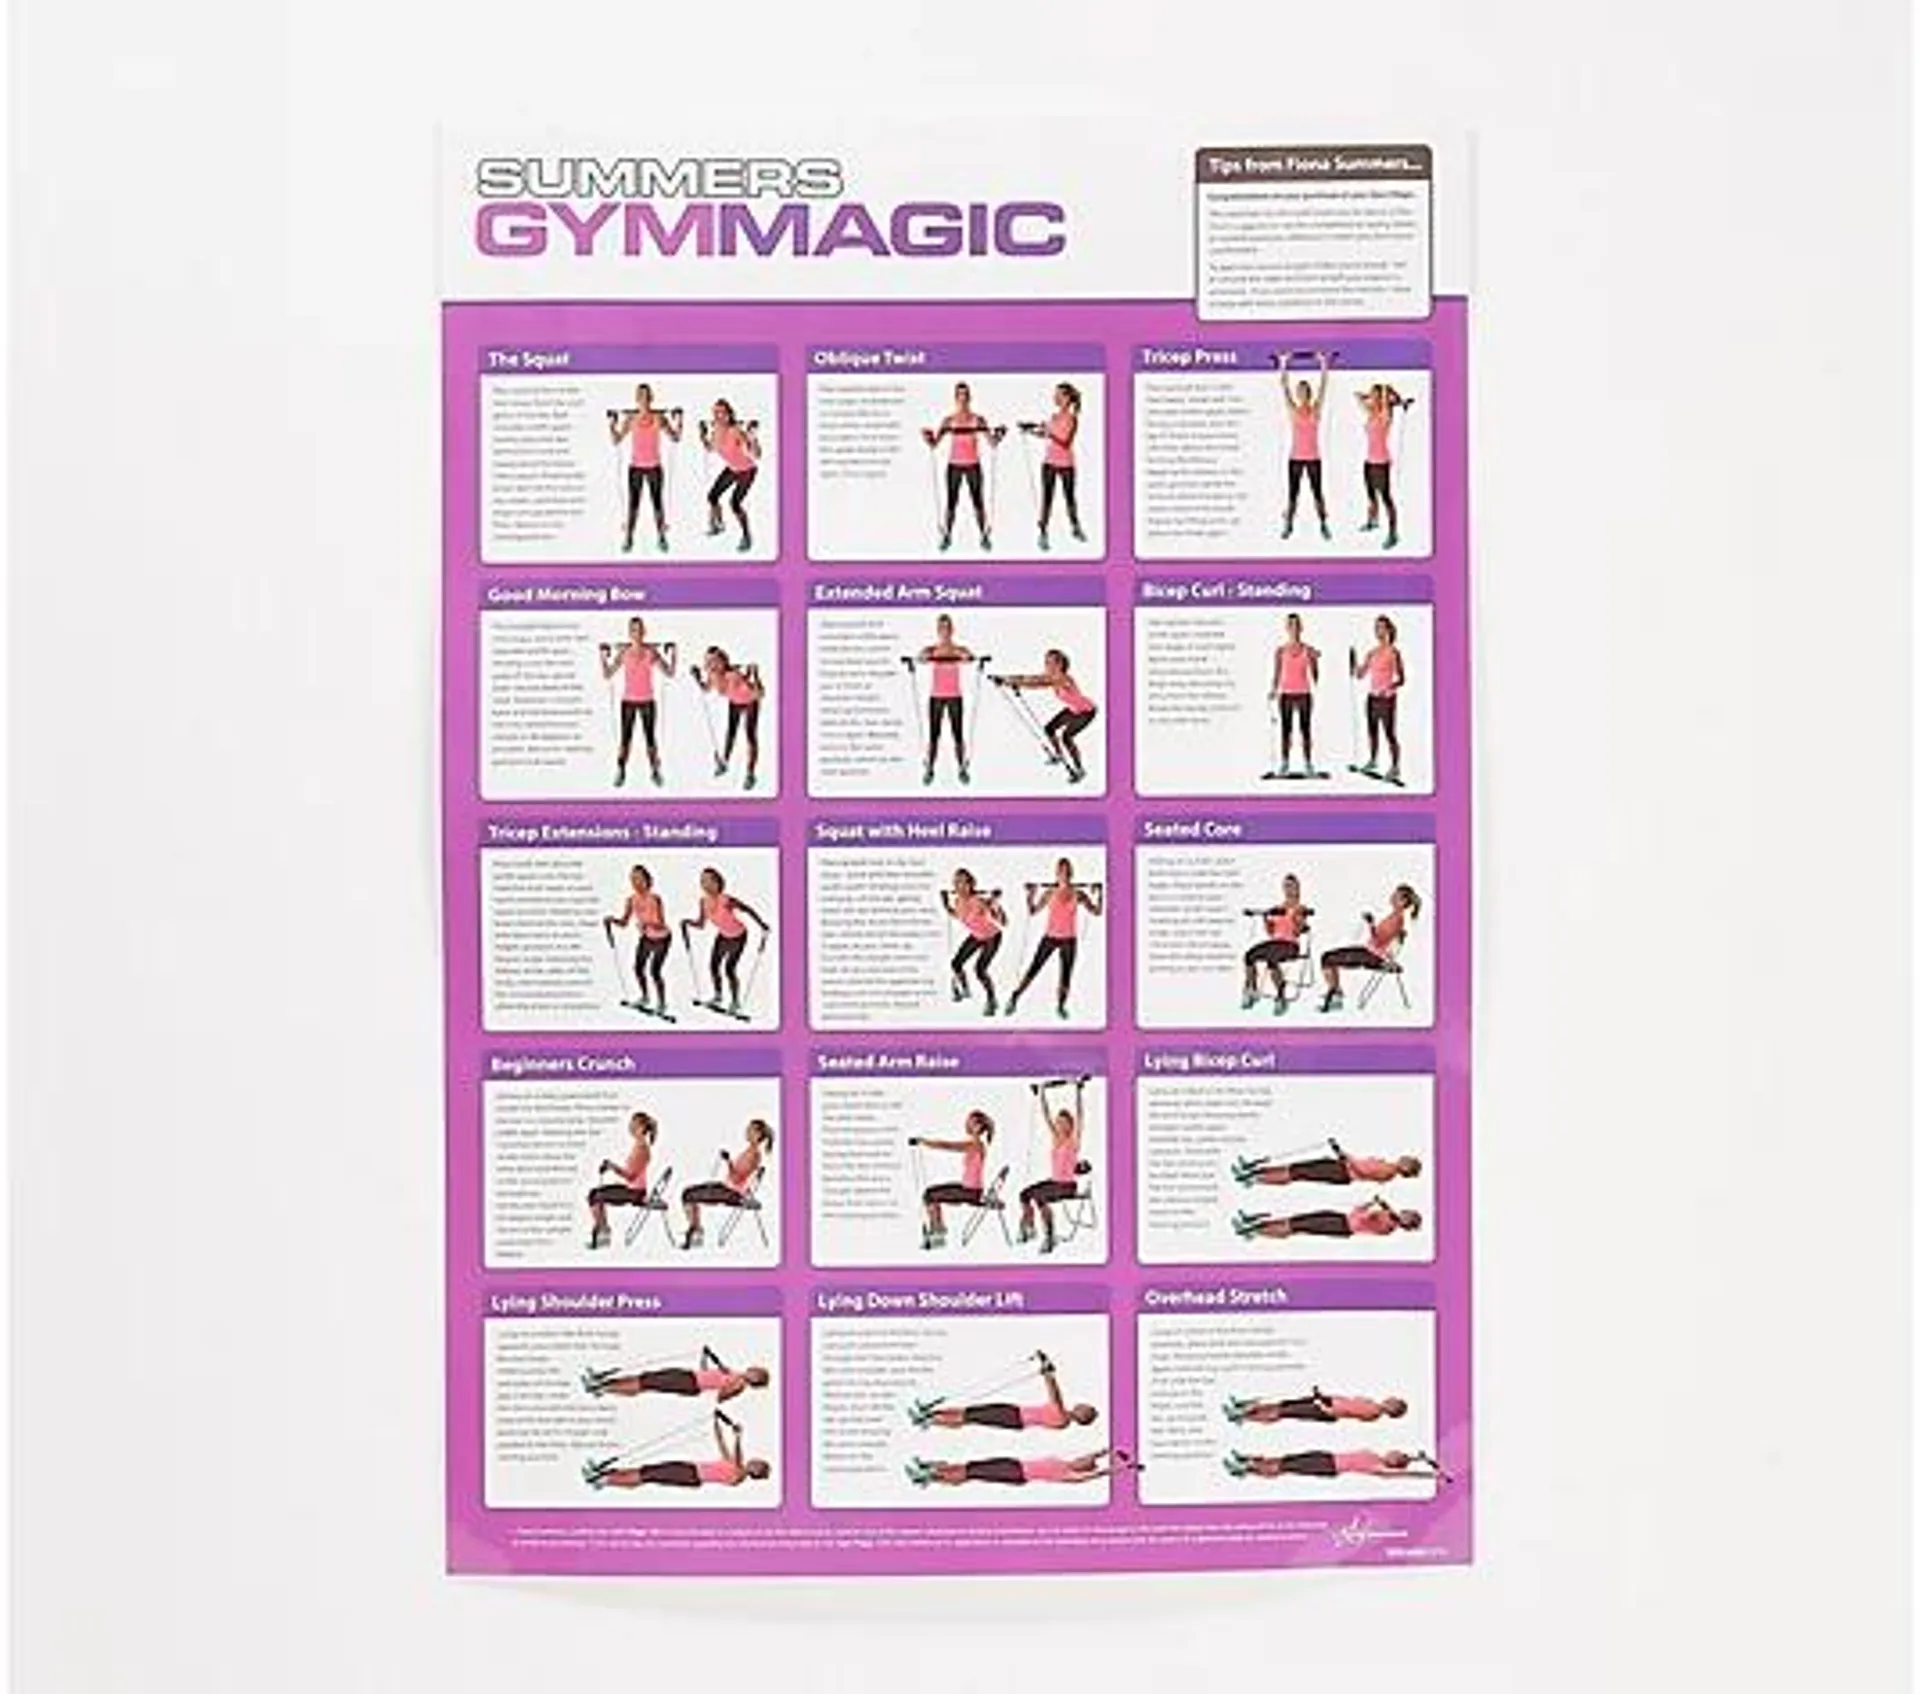 Summers Gym Magic with 4 DVD's Wallchart and Workout Booklet